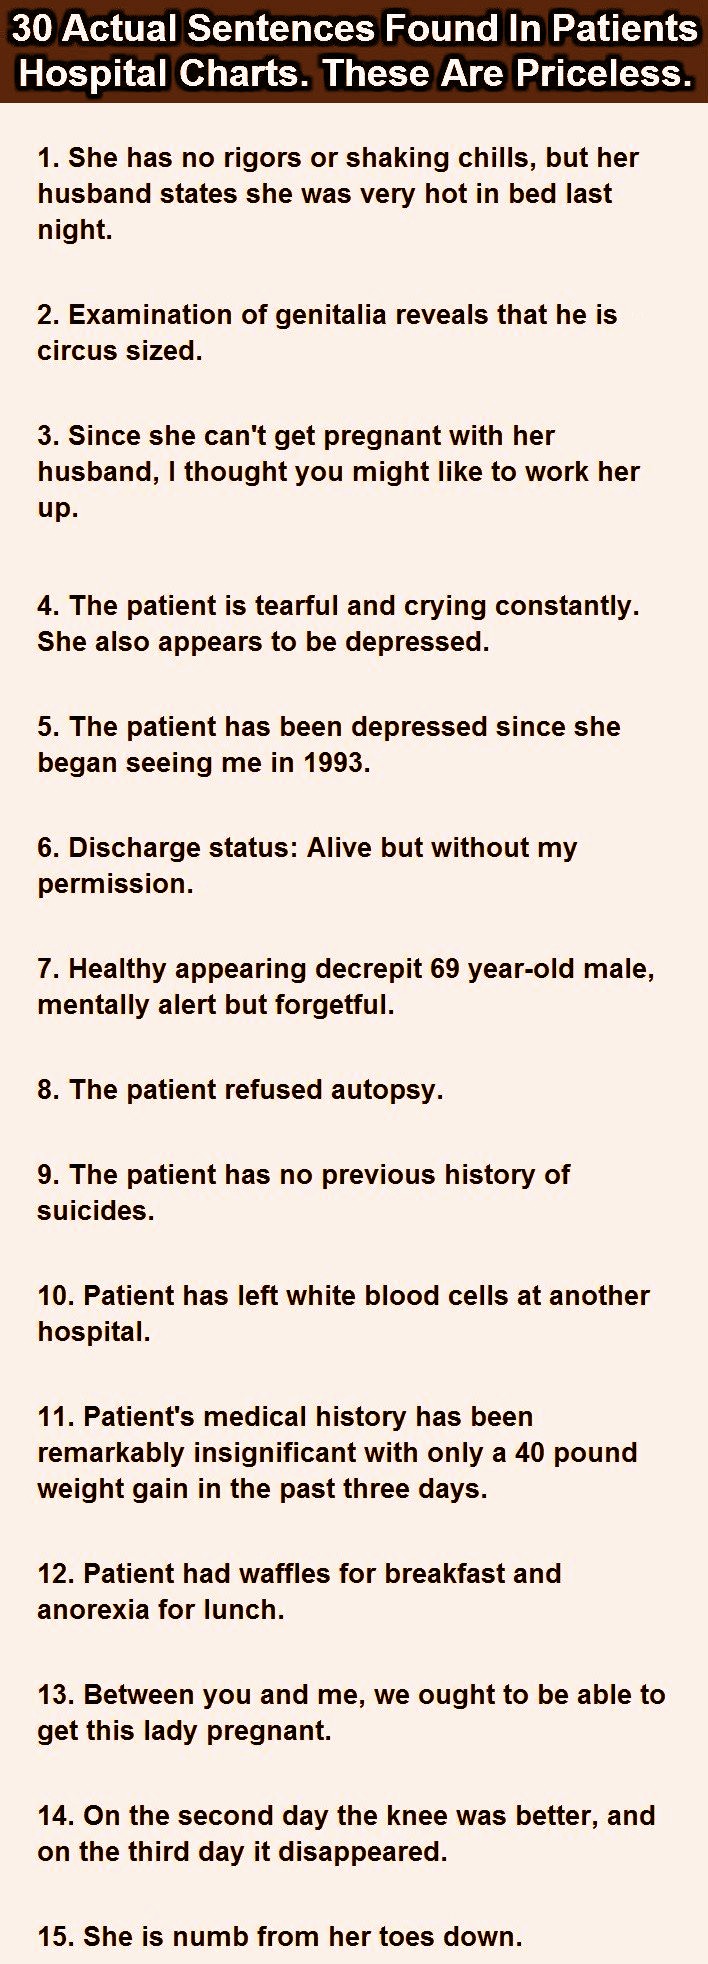 30 Sentences That Could Be Actually Important For Every Patient In The Hospital.